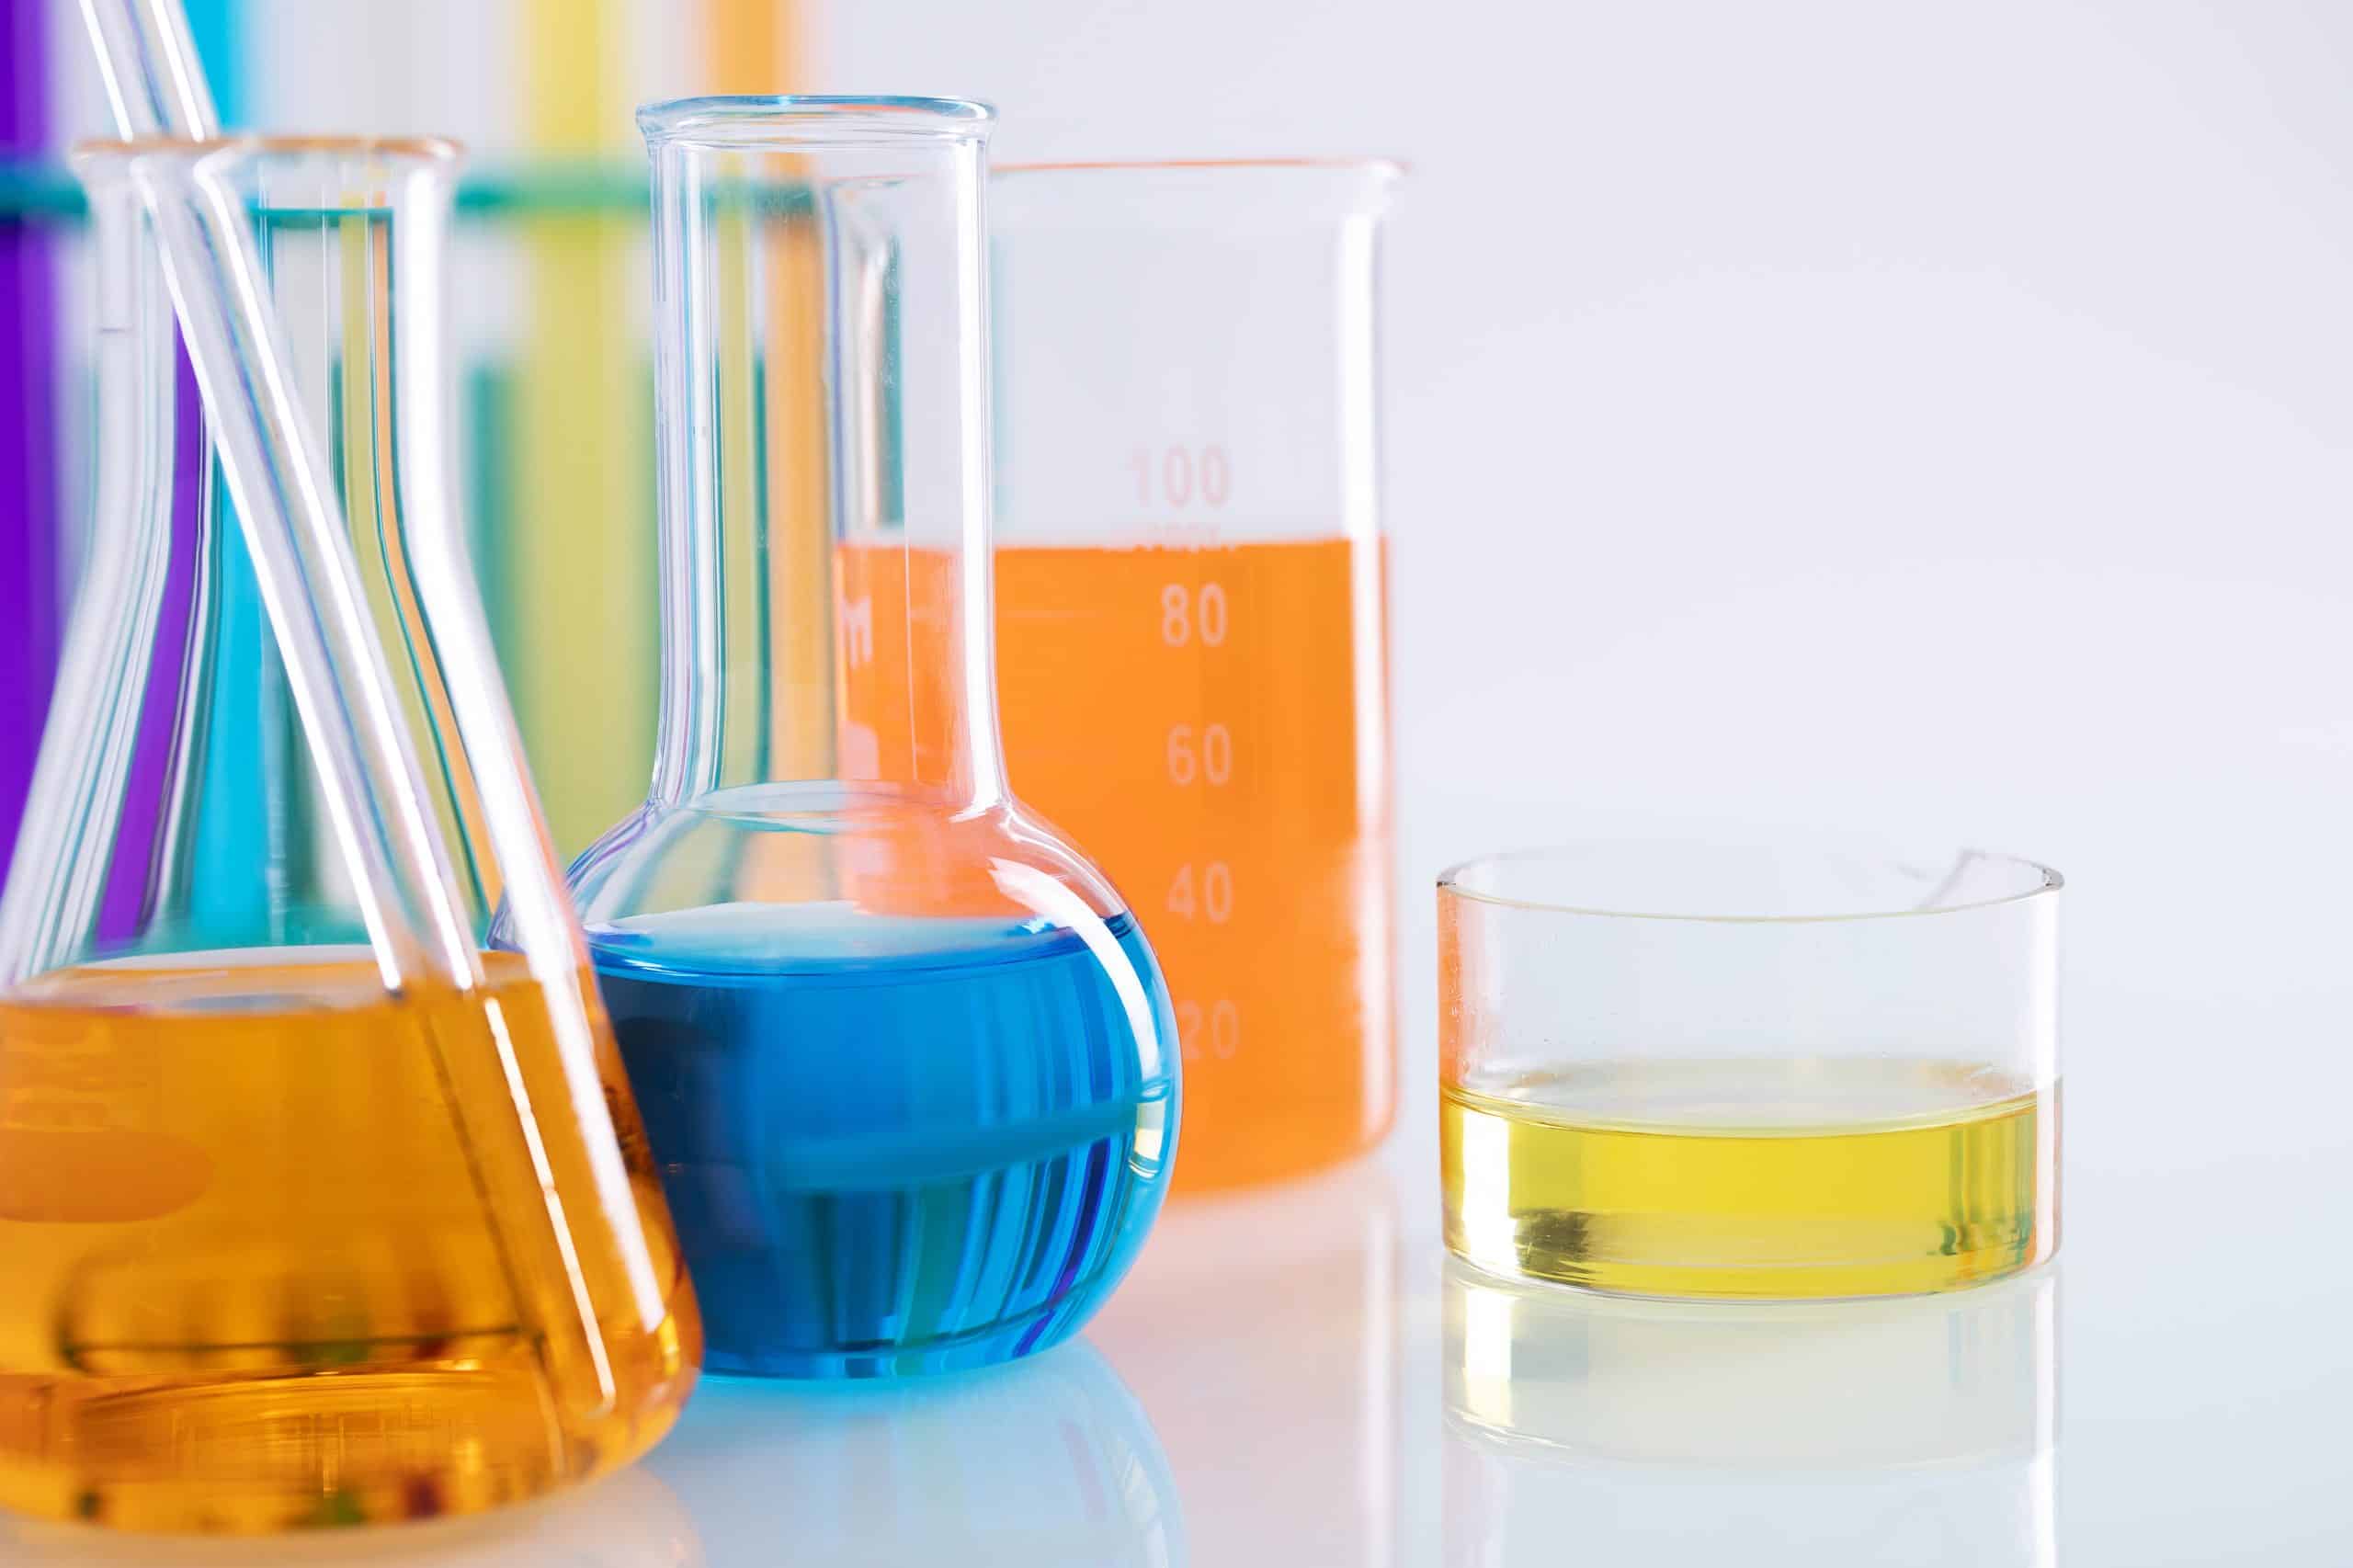 Colorful liquids in laboratory glassware on a white background, suggesting a chemical or scientific experiment.